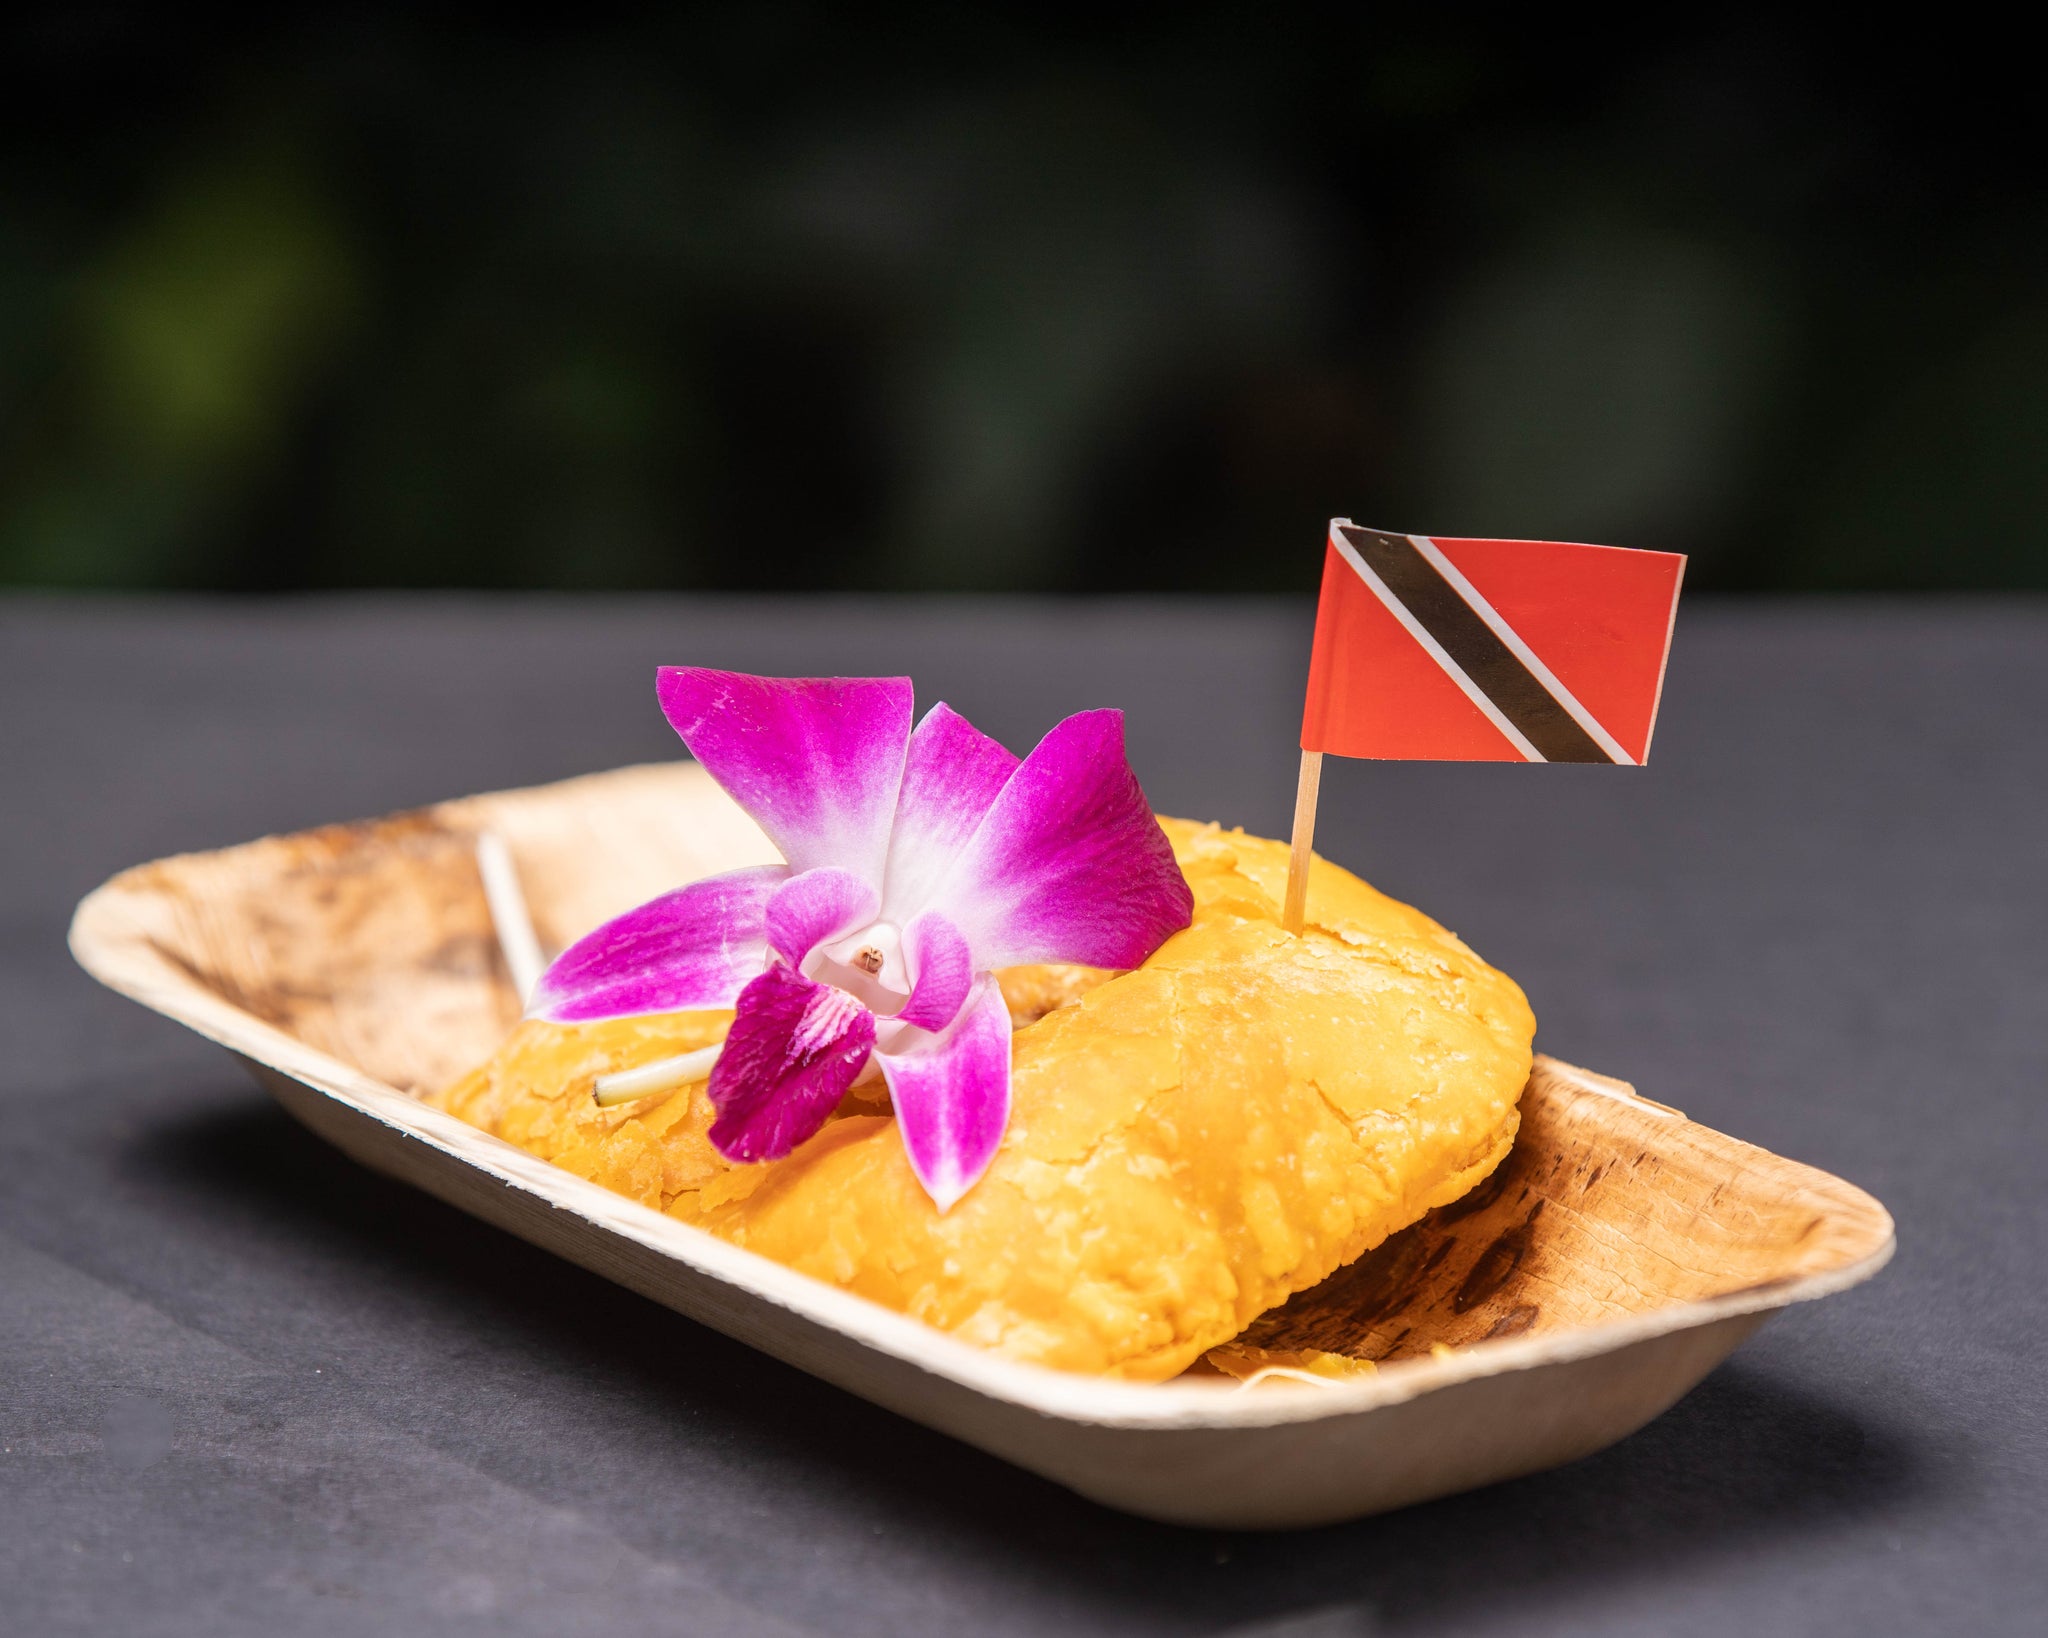 Fresh Bay Area takes on the Jamaican Patty